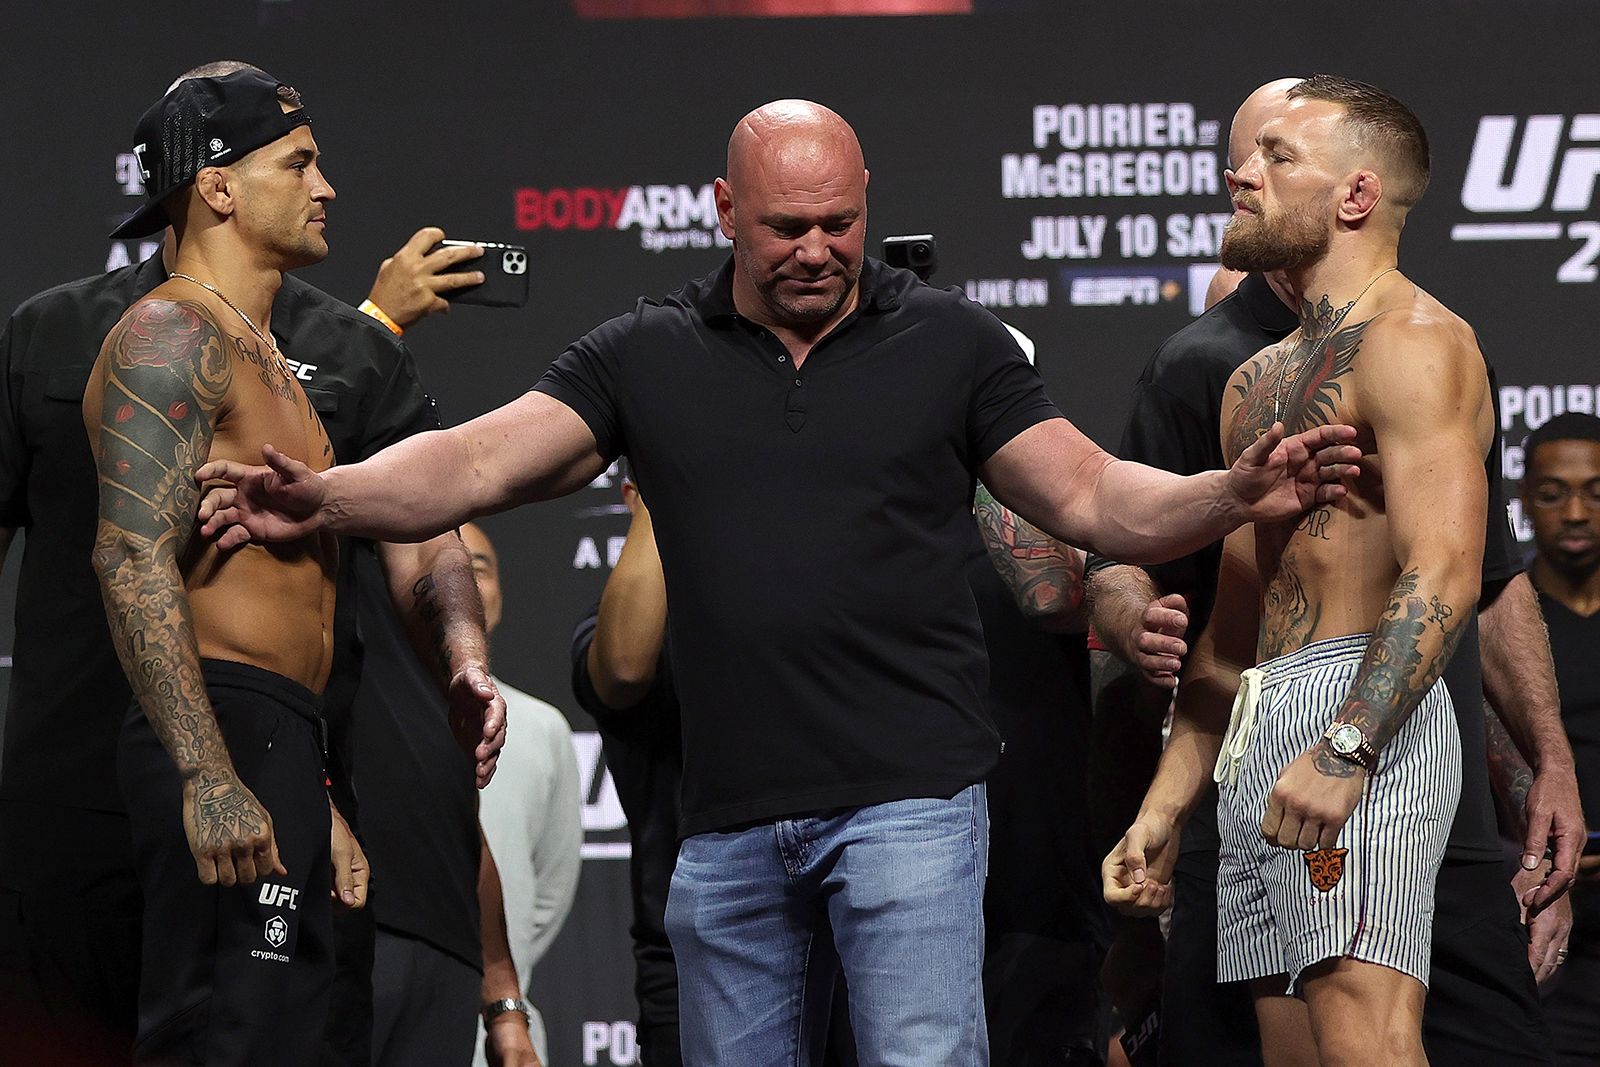 Dustin Poirier beats Conor McGregor with a TKO in UFC 264 after McGregor  appears to have broken his leg or ankle